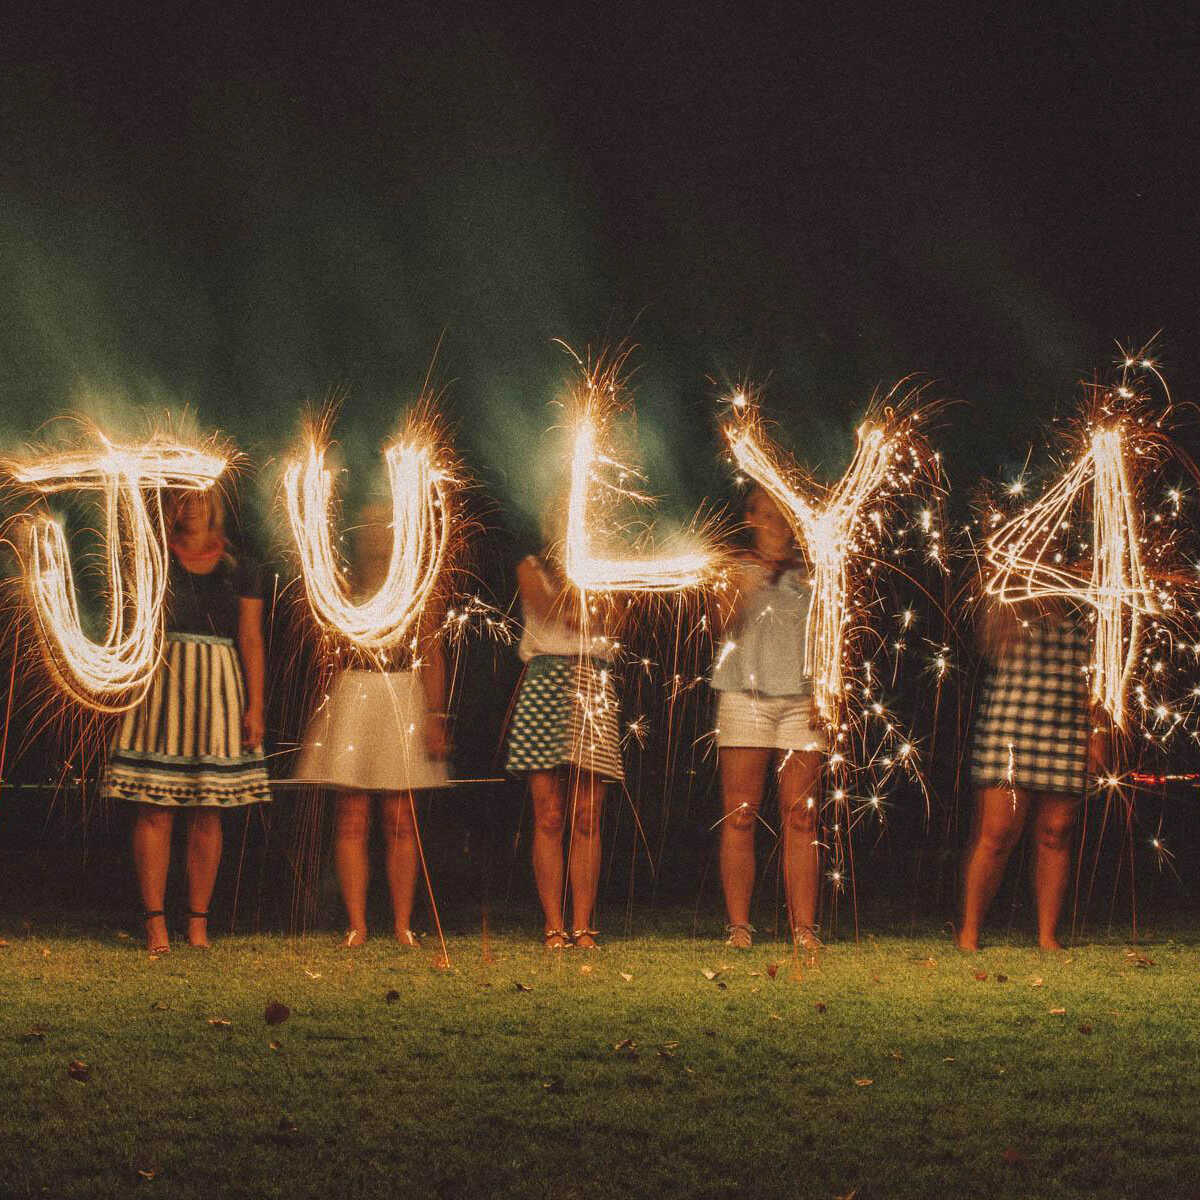 Sparklers spelling out July 4